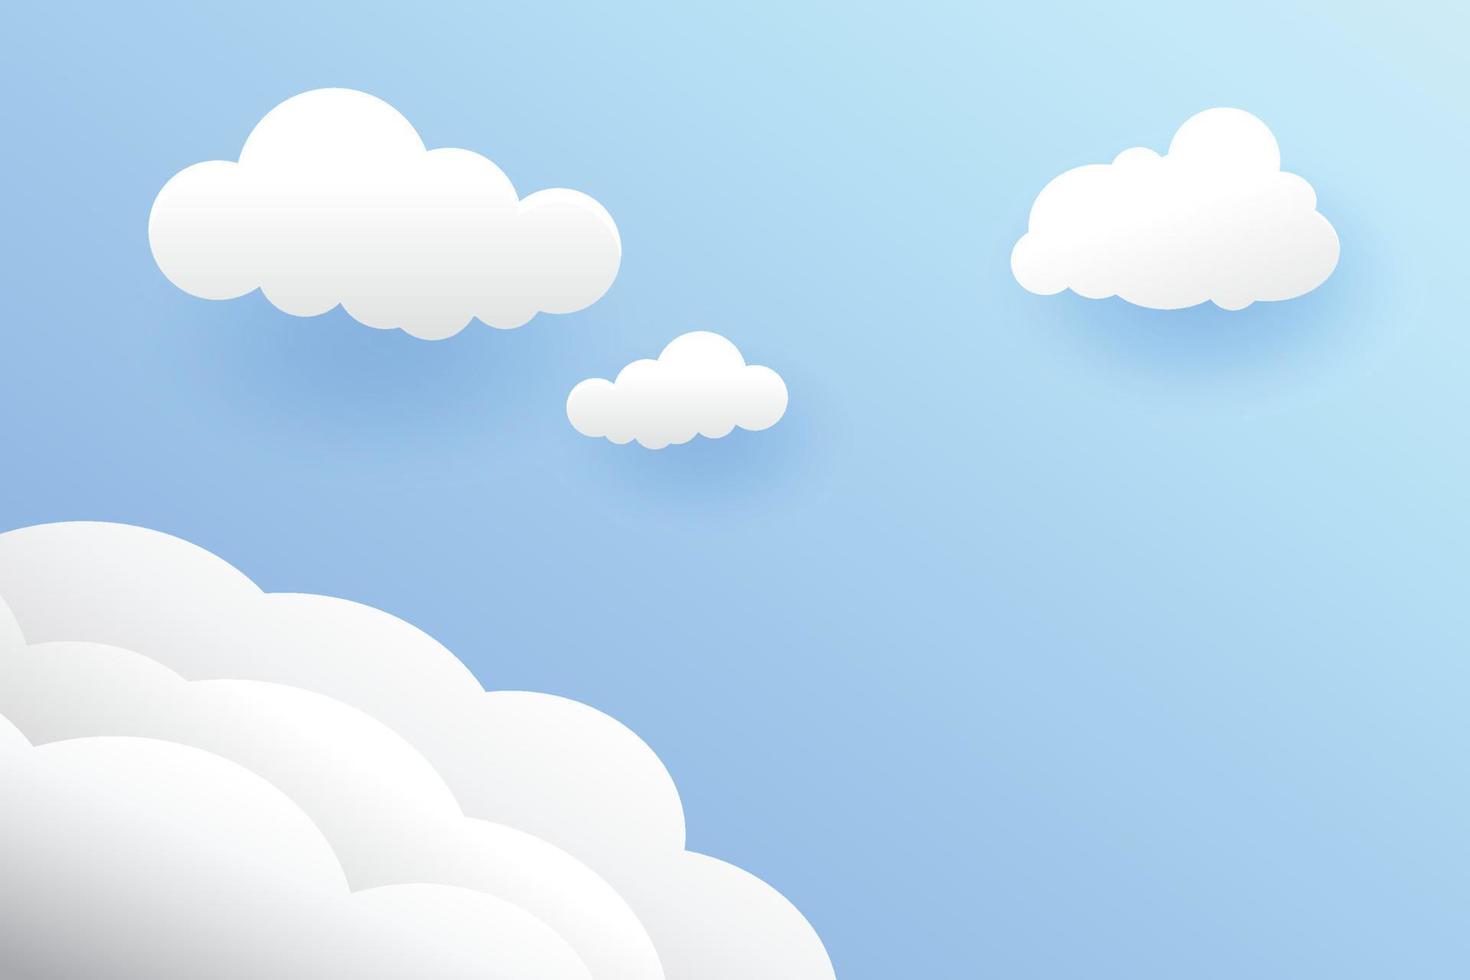 Clouds in the sky, The summer beautiful nature background, paper art style. vector